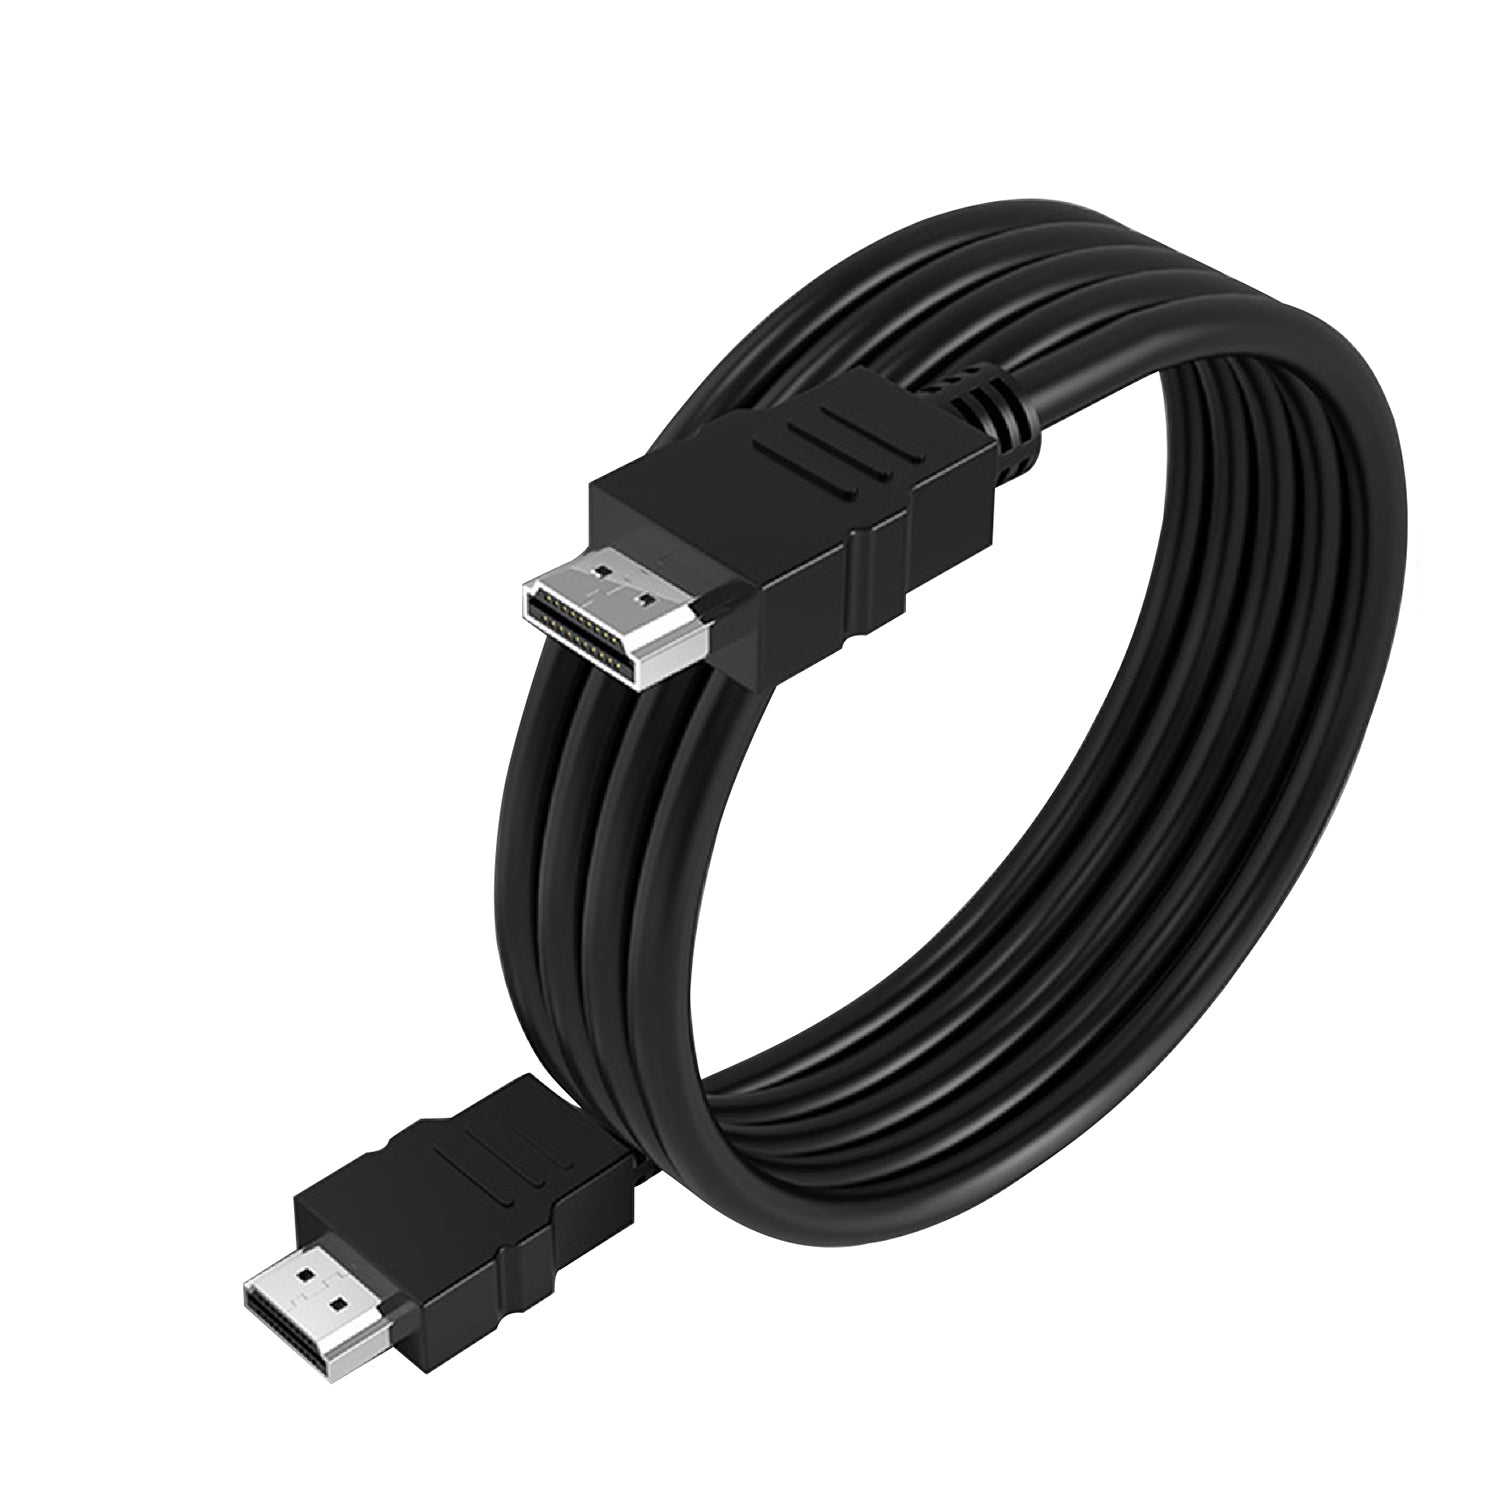 3FT HDMI to Hdmi High-Definition Television to PC Data Cable-Black